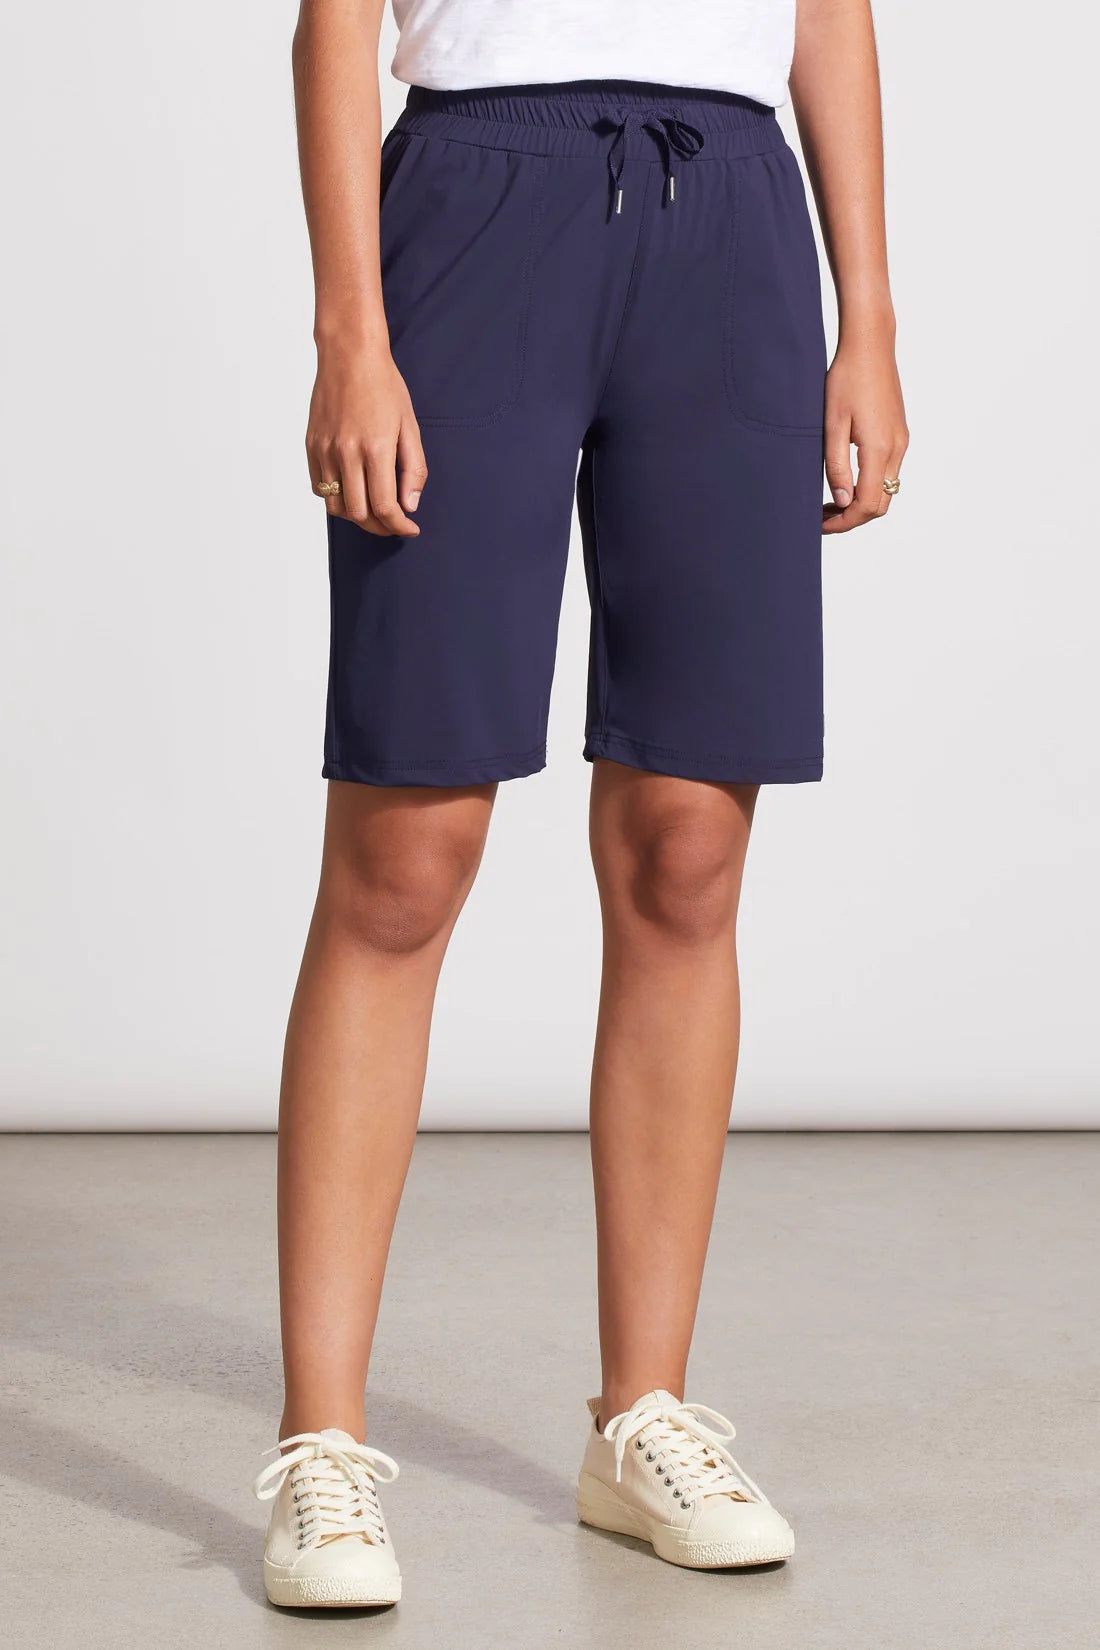 Four-way Stretch Pull-on Shorts by Tribal